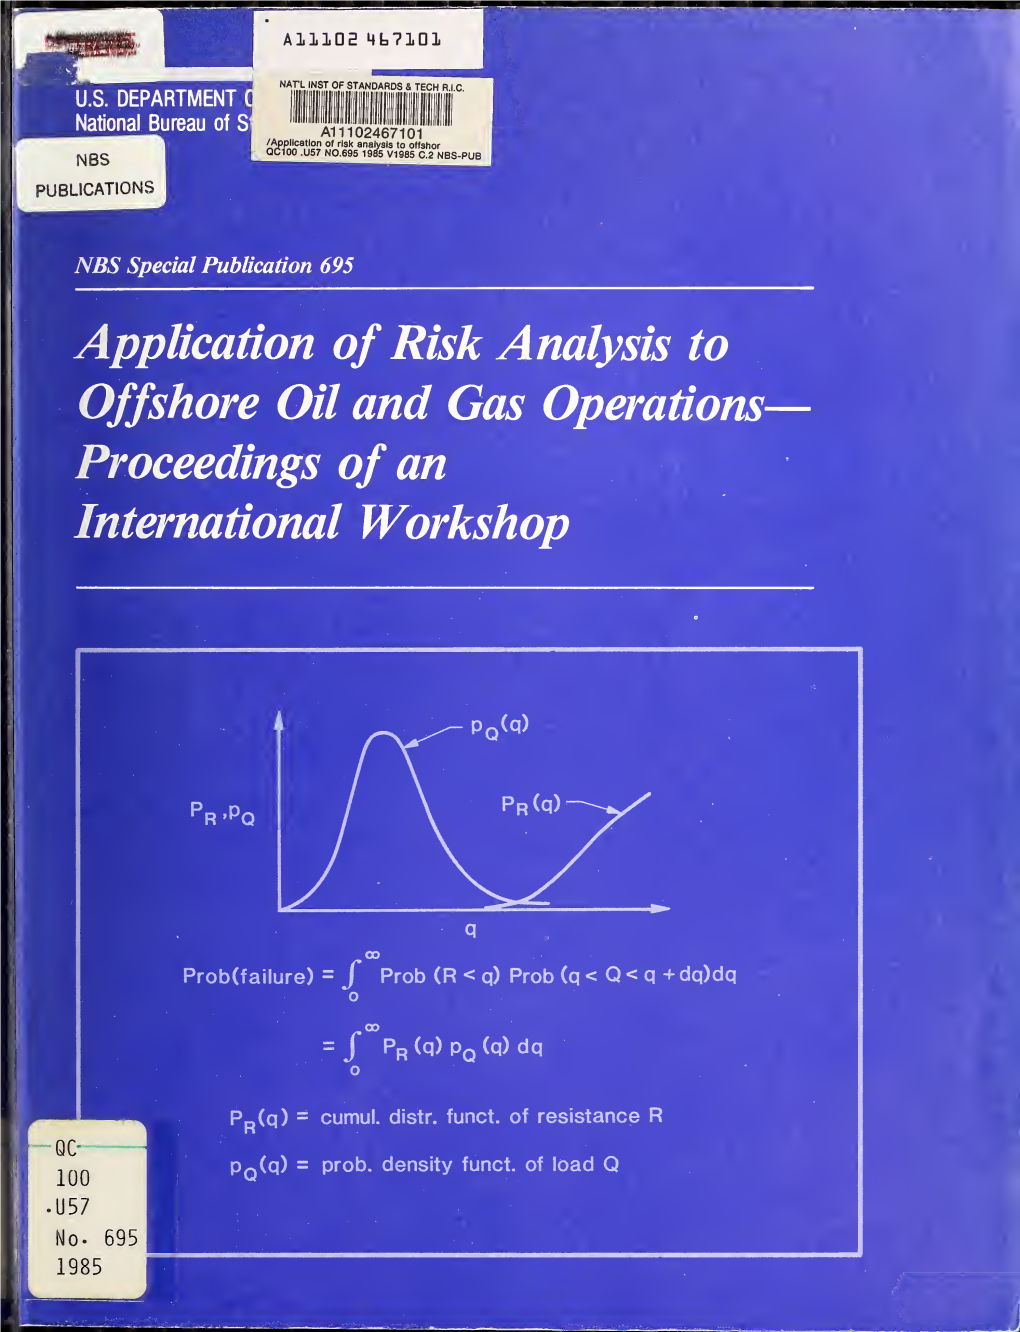 Application of Risk Analysis to Offshore Oil and Gas Operations- Proceedings of an International Workshop